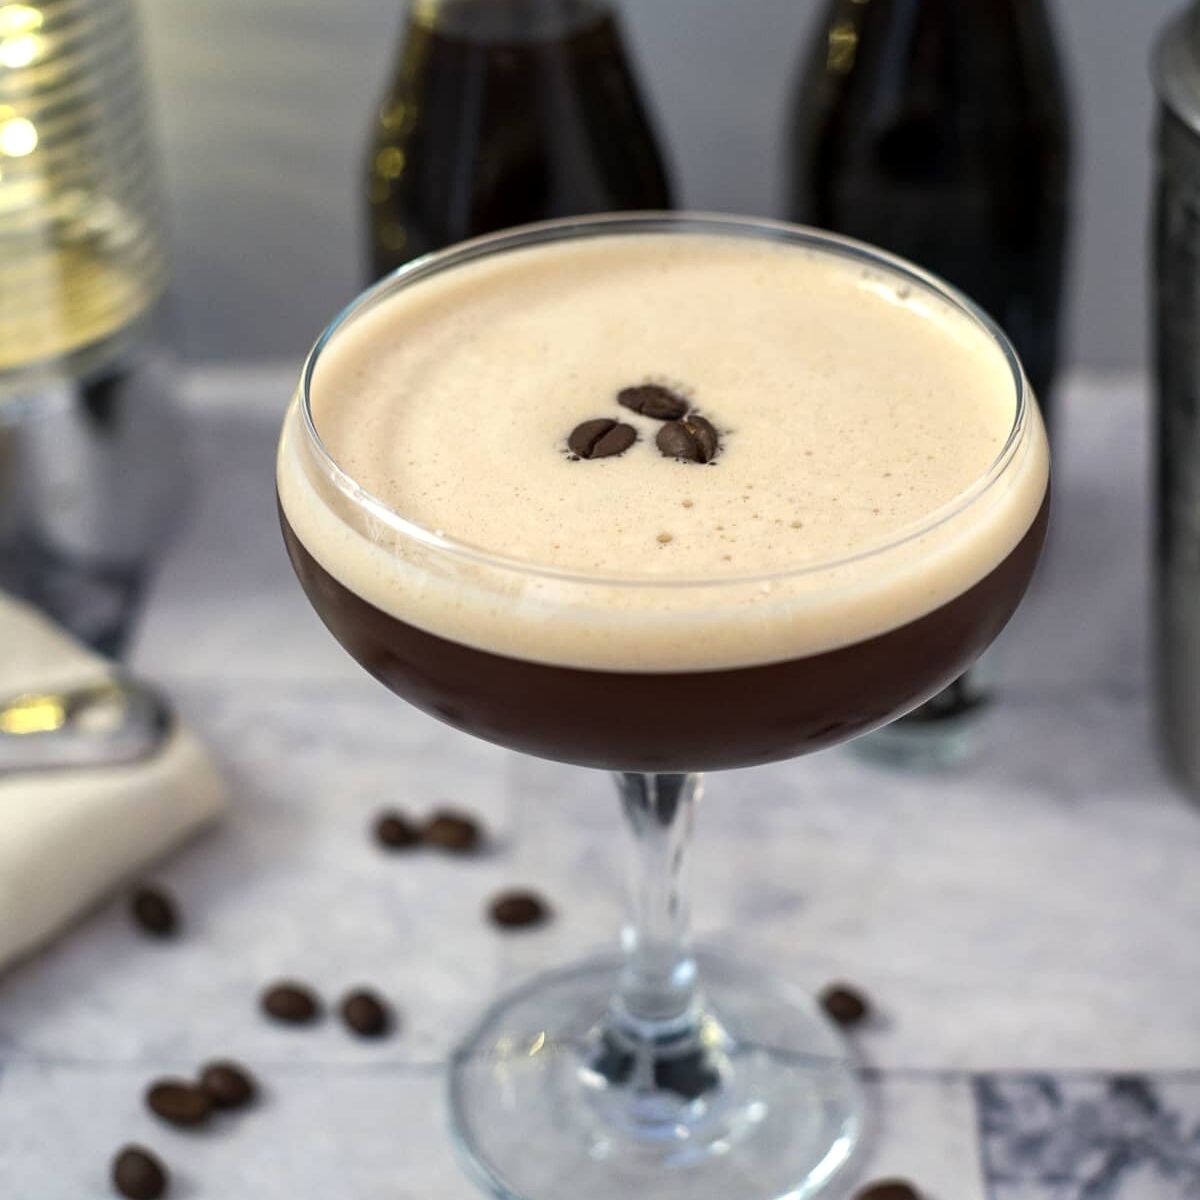 A keto espresso martini garnished with coffee beans in the glass.